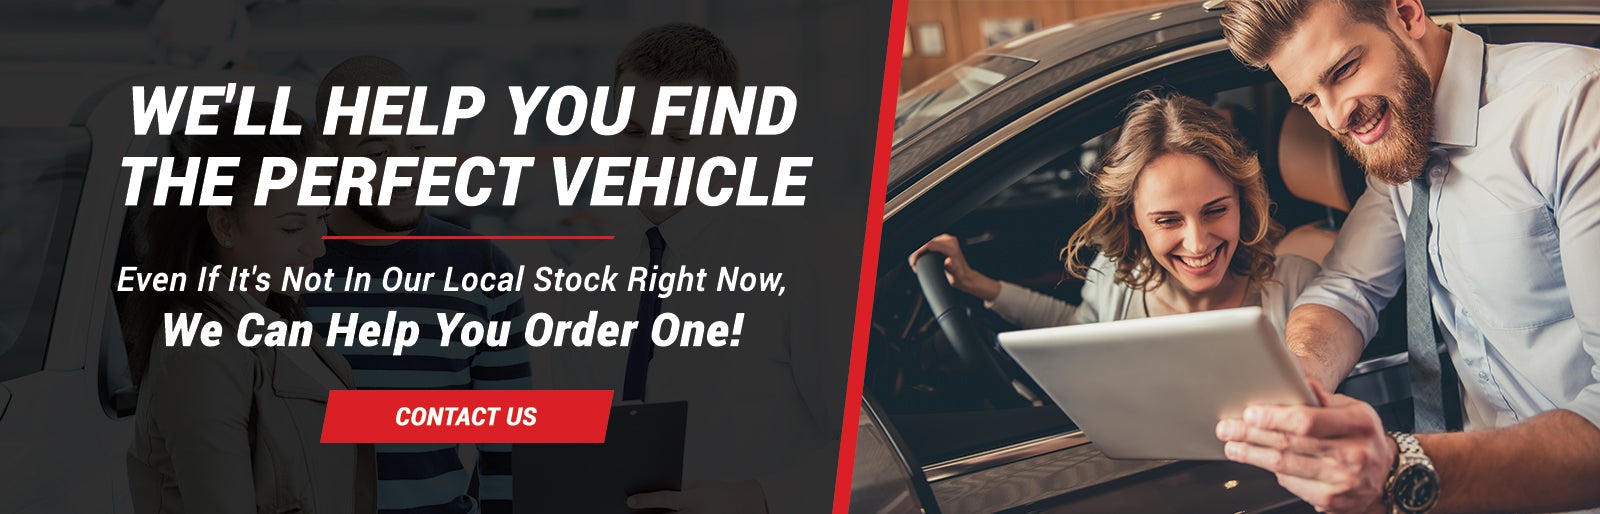 We'll Help Your Find The Perfect Vehicle